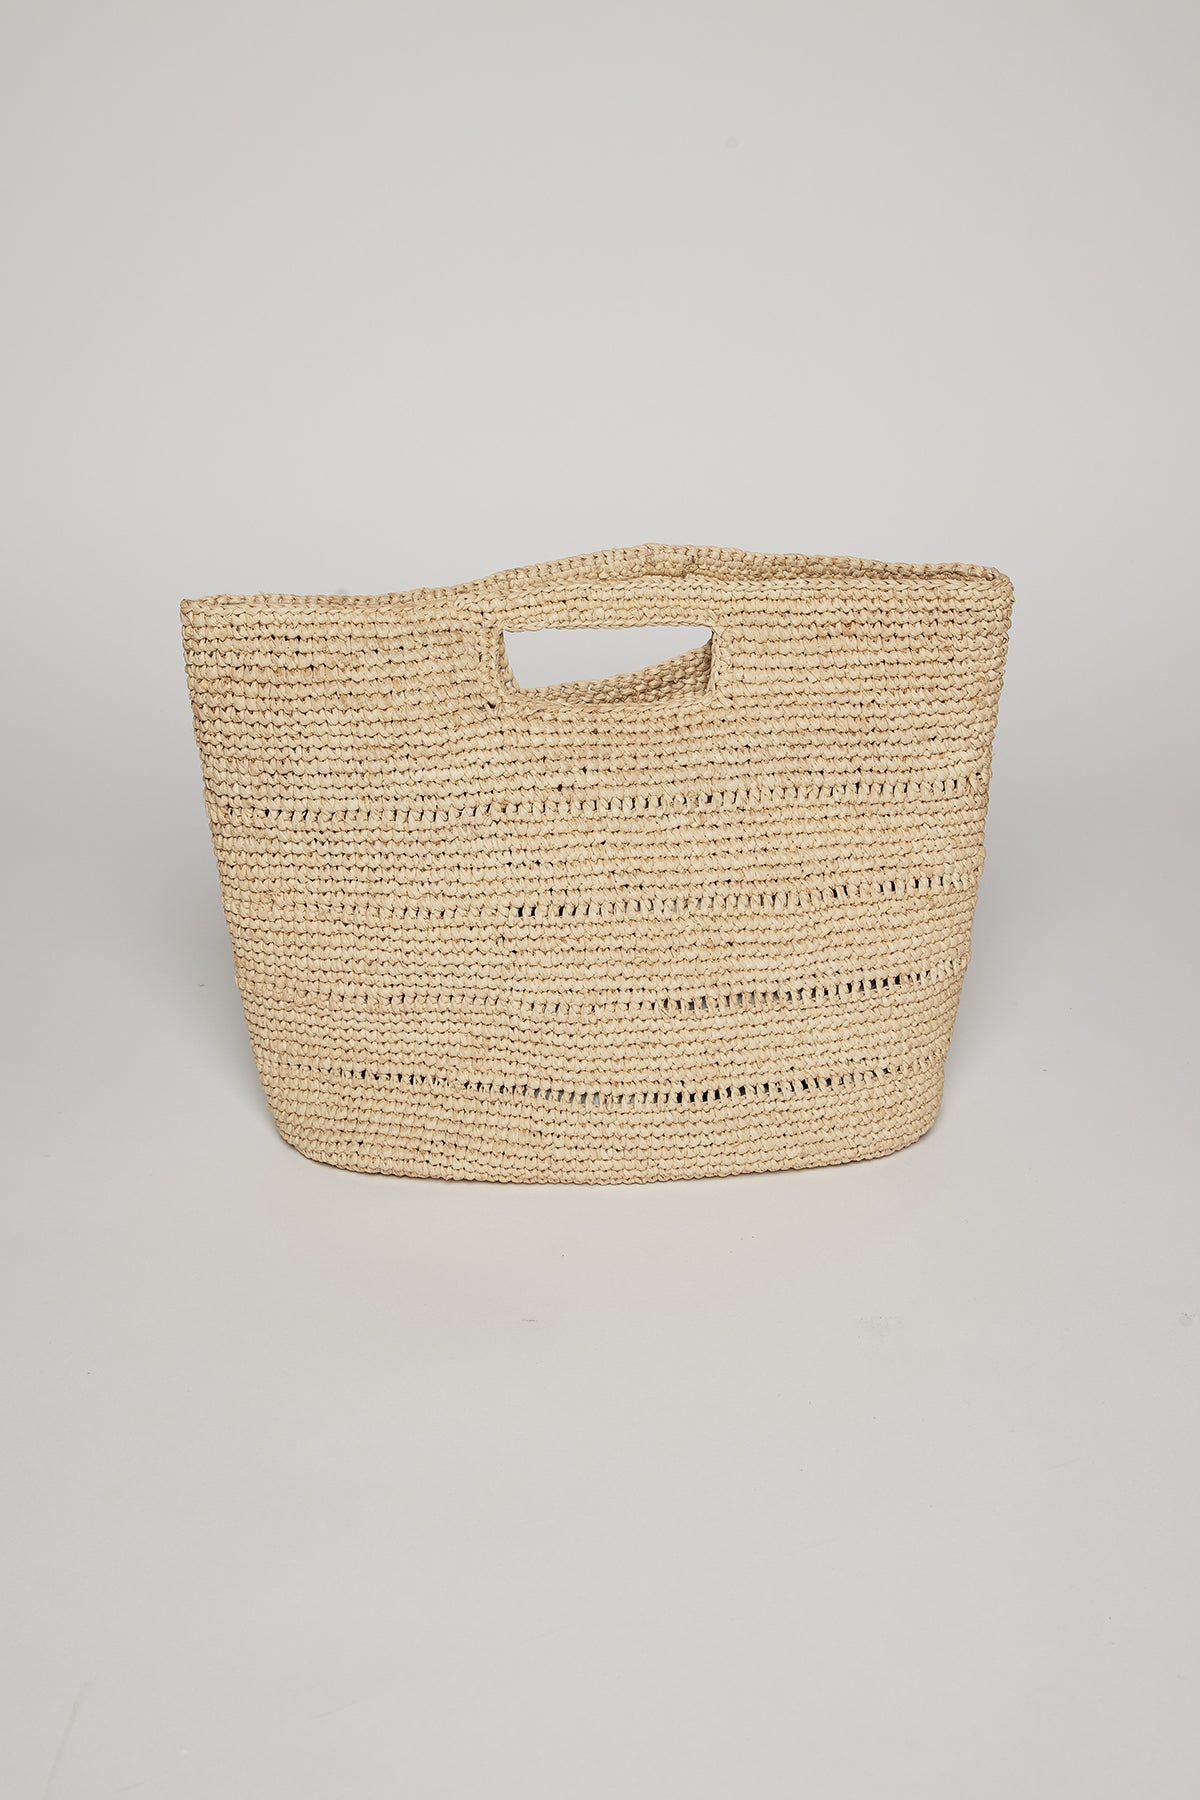 A beige raffia Naomi handheld straw bag by Velvet by Graham & Spencer with horizontal patterns, displayed against a plain white background.-36571449557185